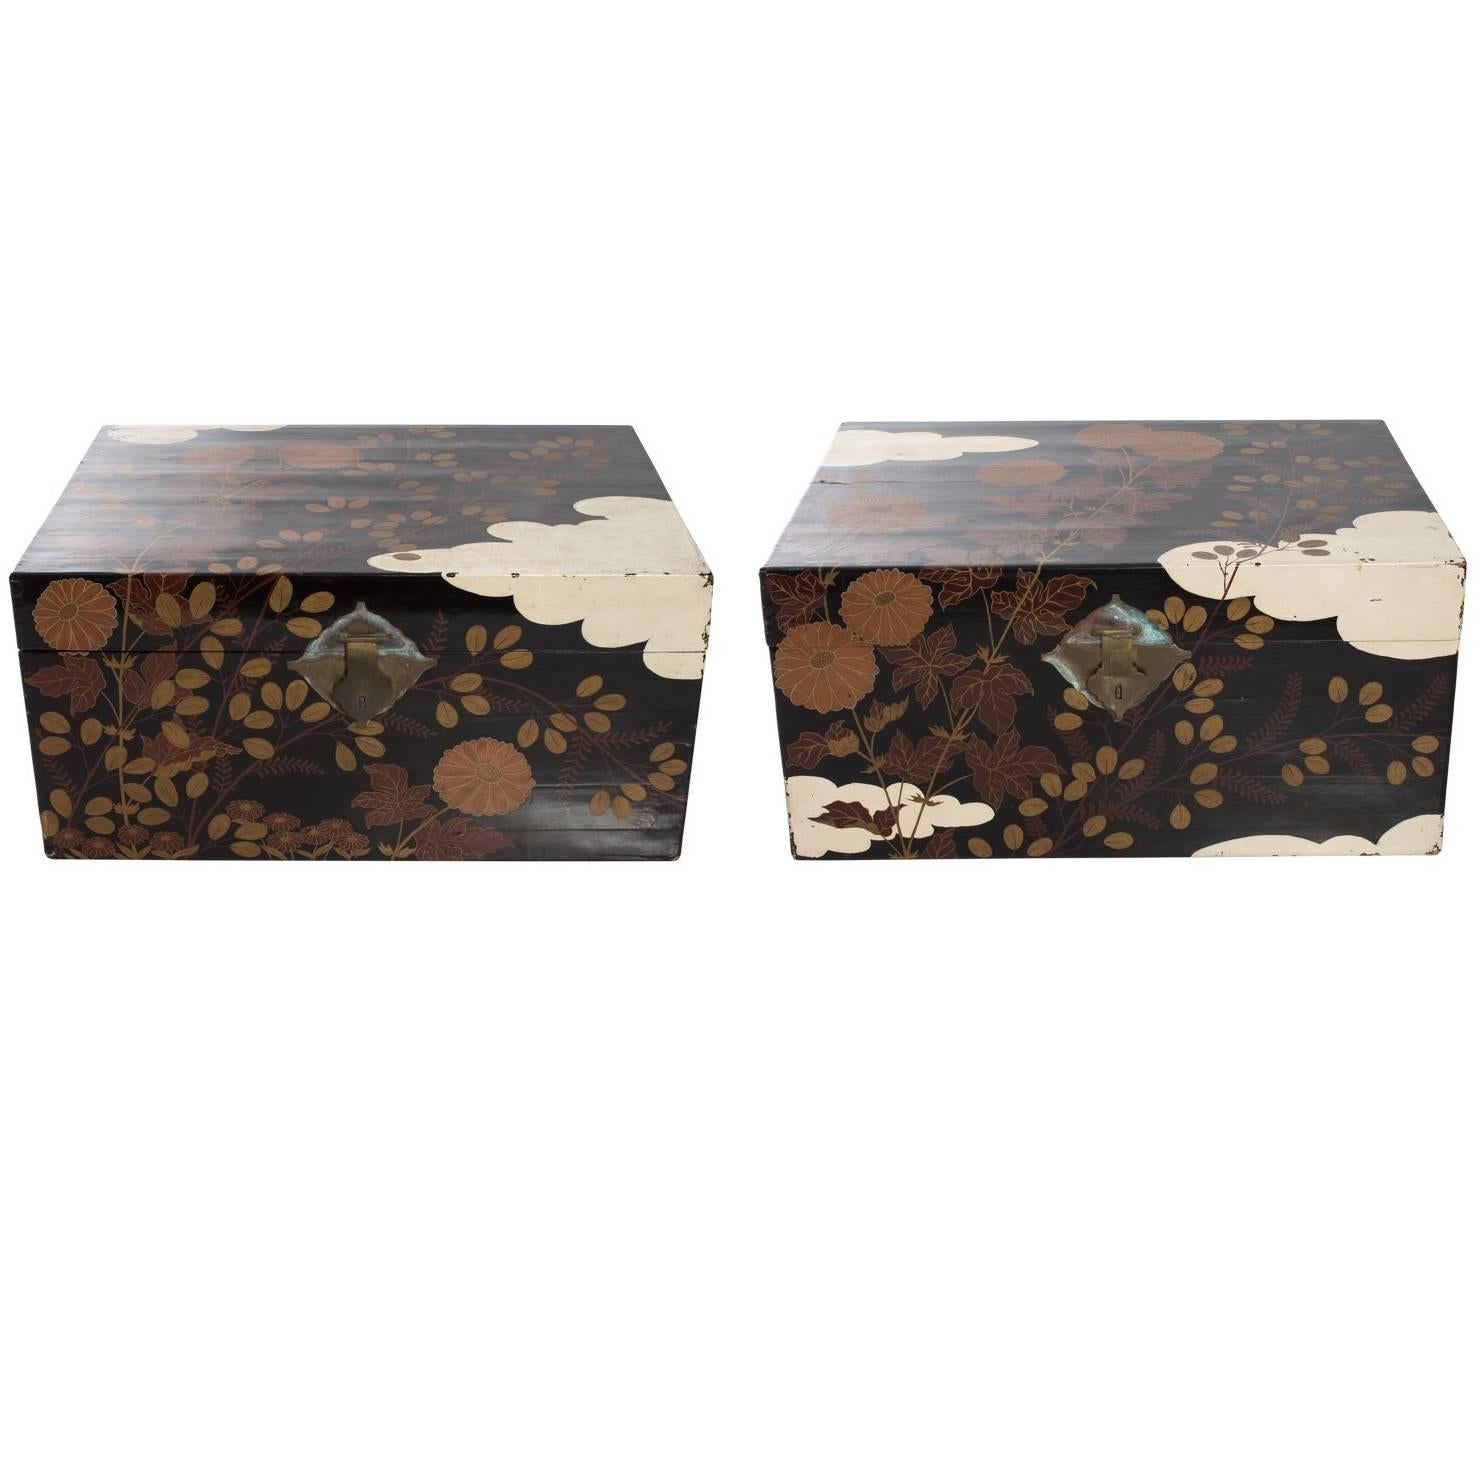 Japanese Lacquered Trunks